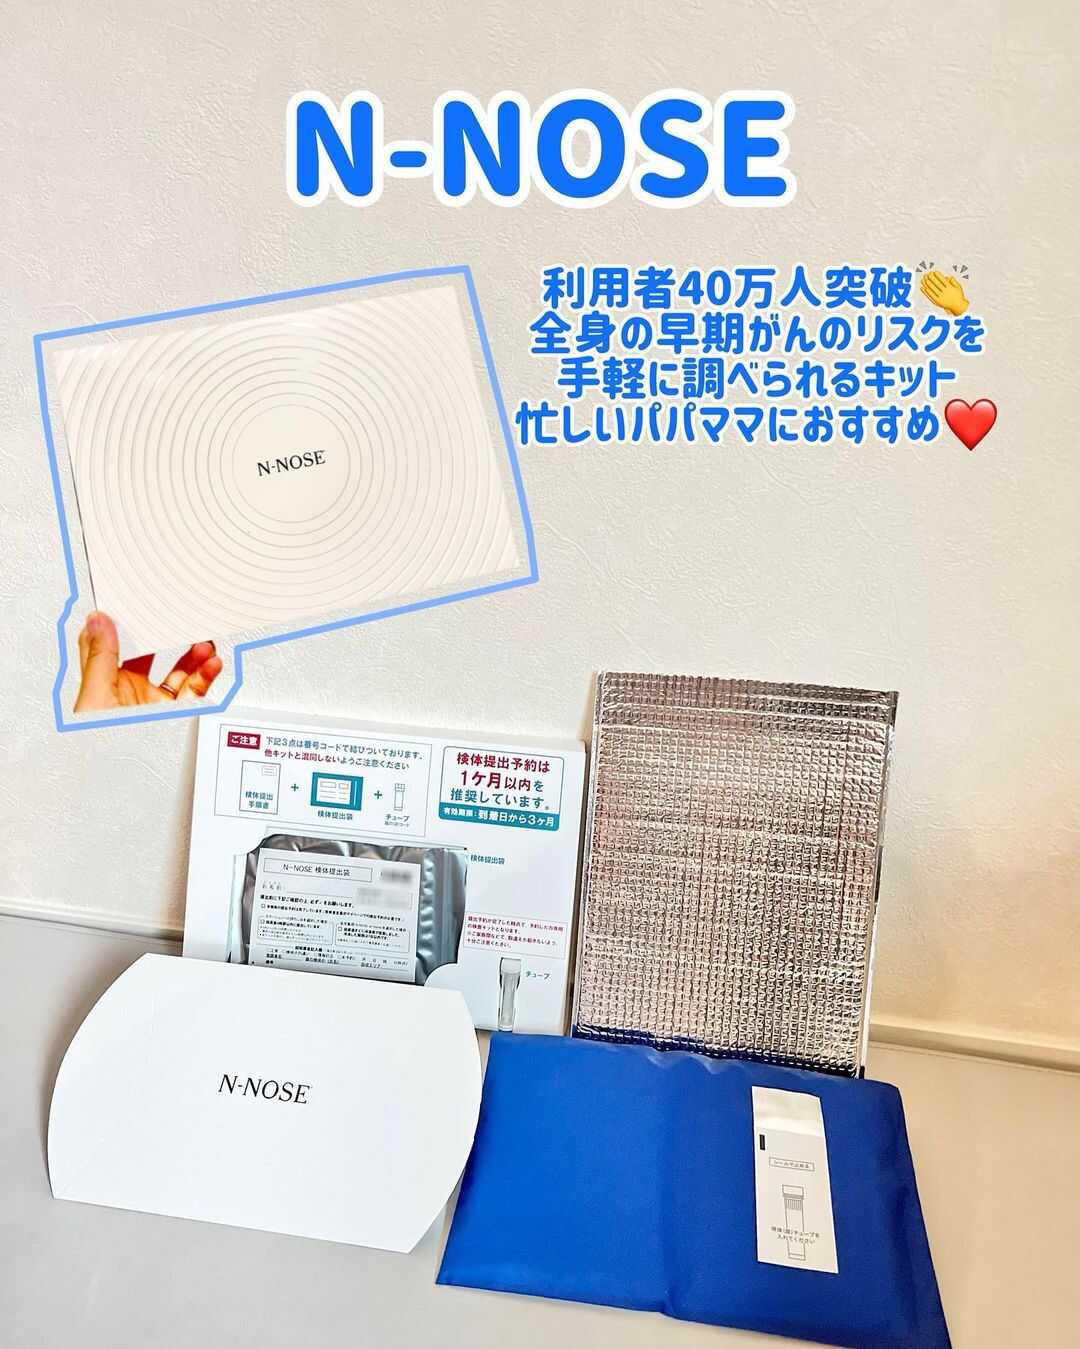 N-NOSE早期がんのリスク検査キット